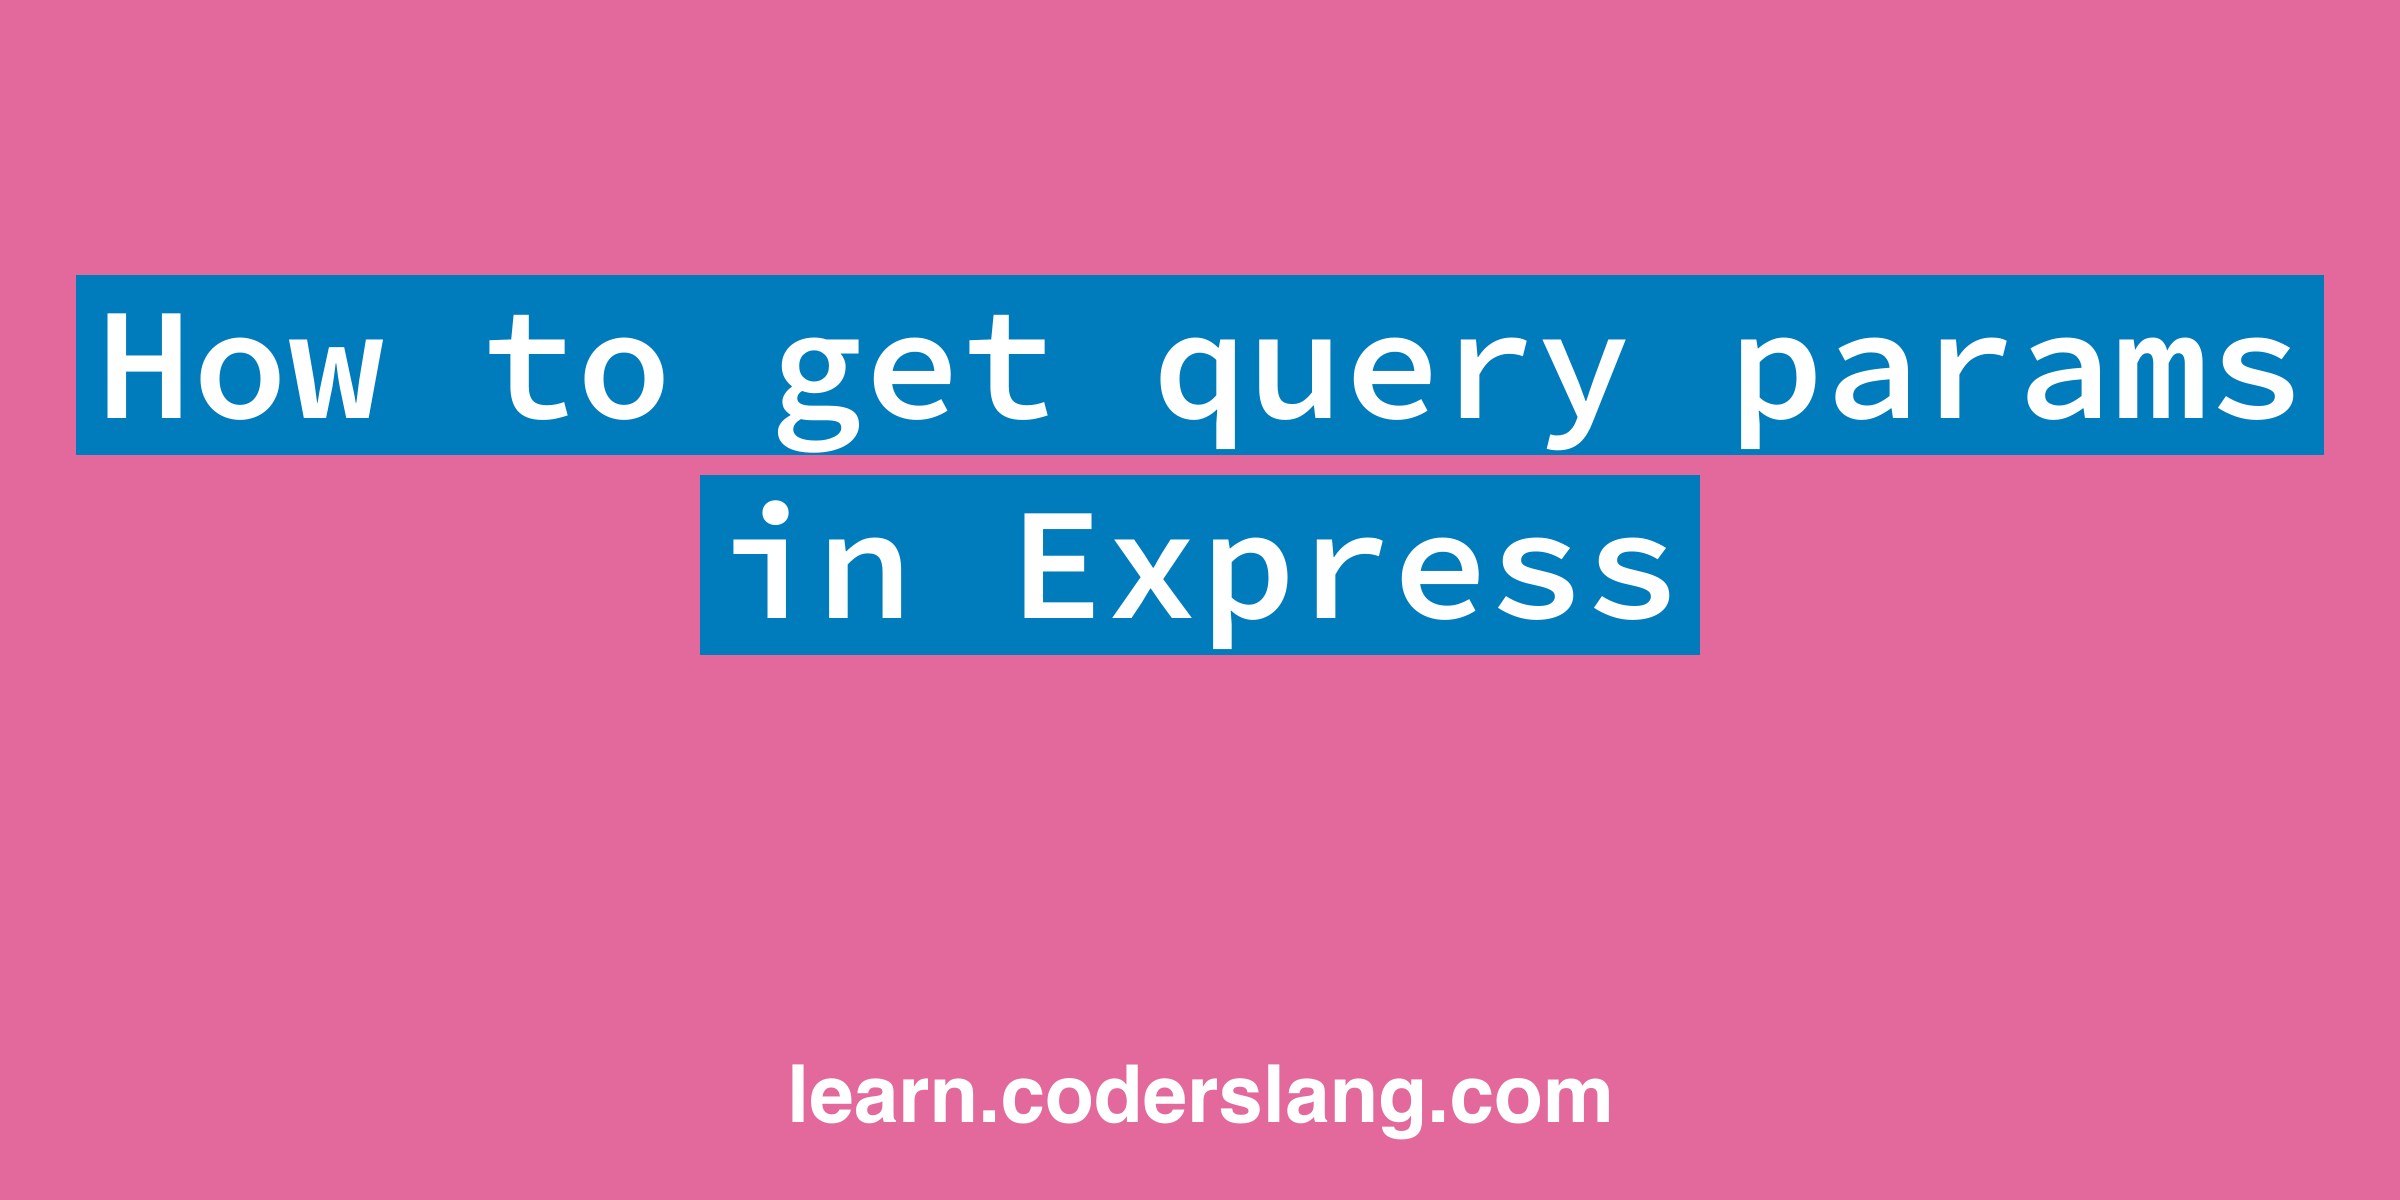 How to get query params in Express